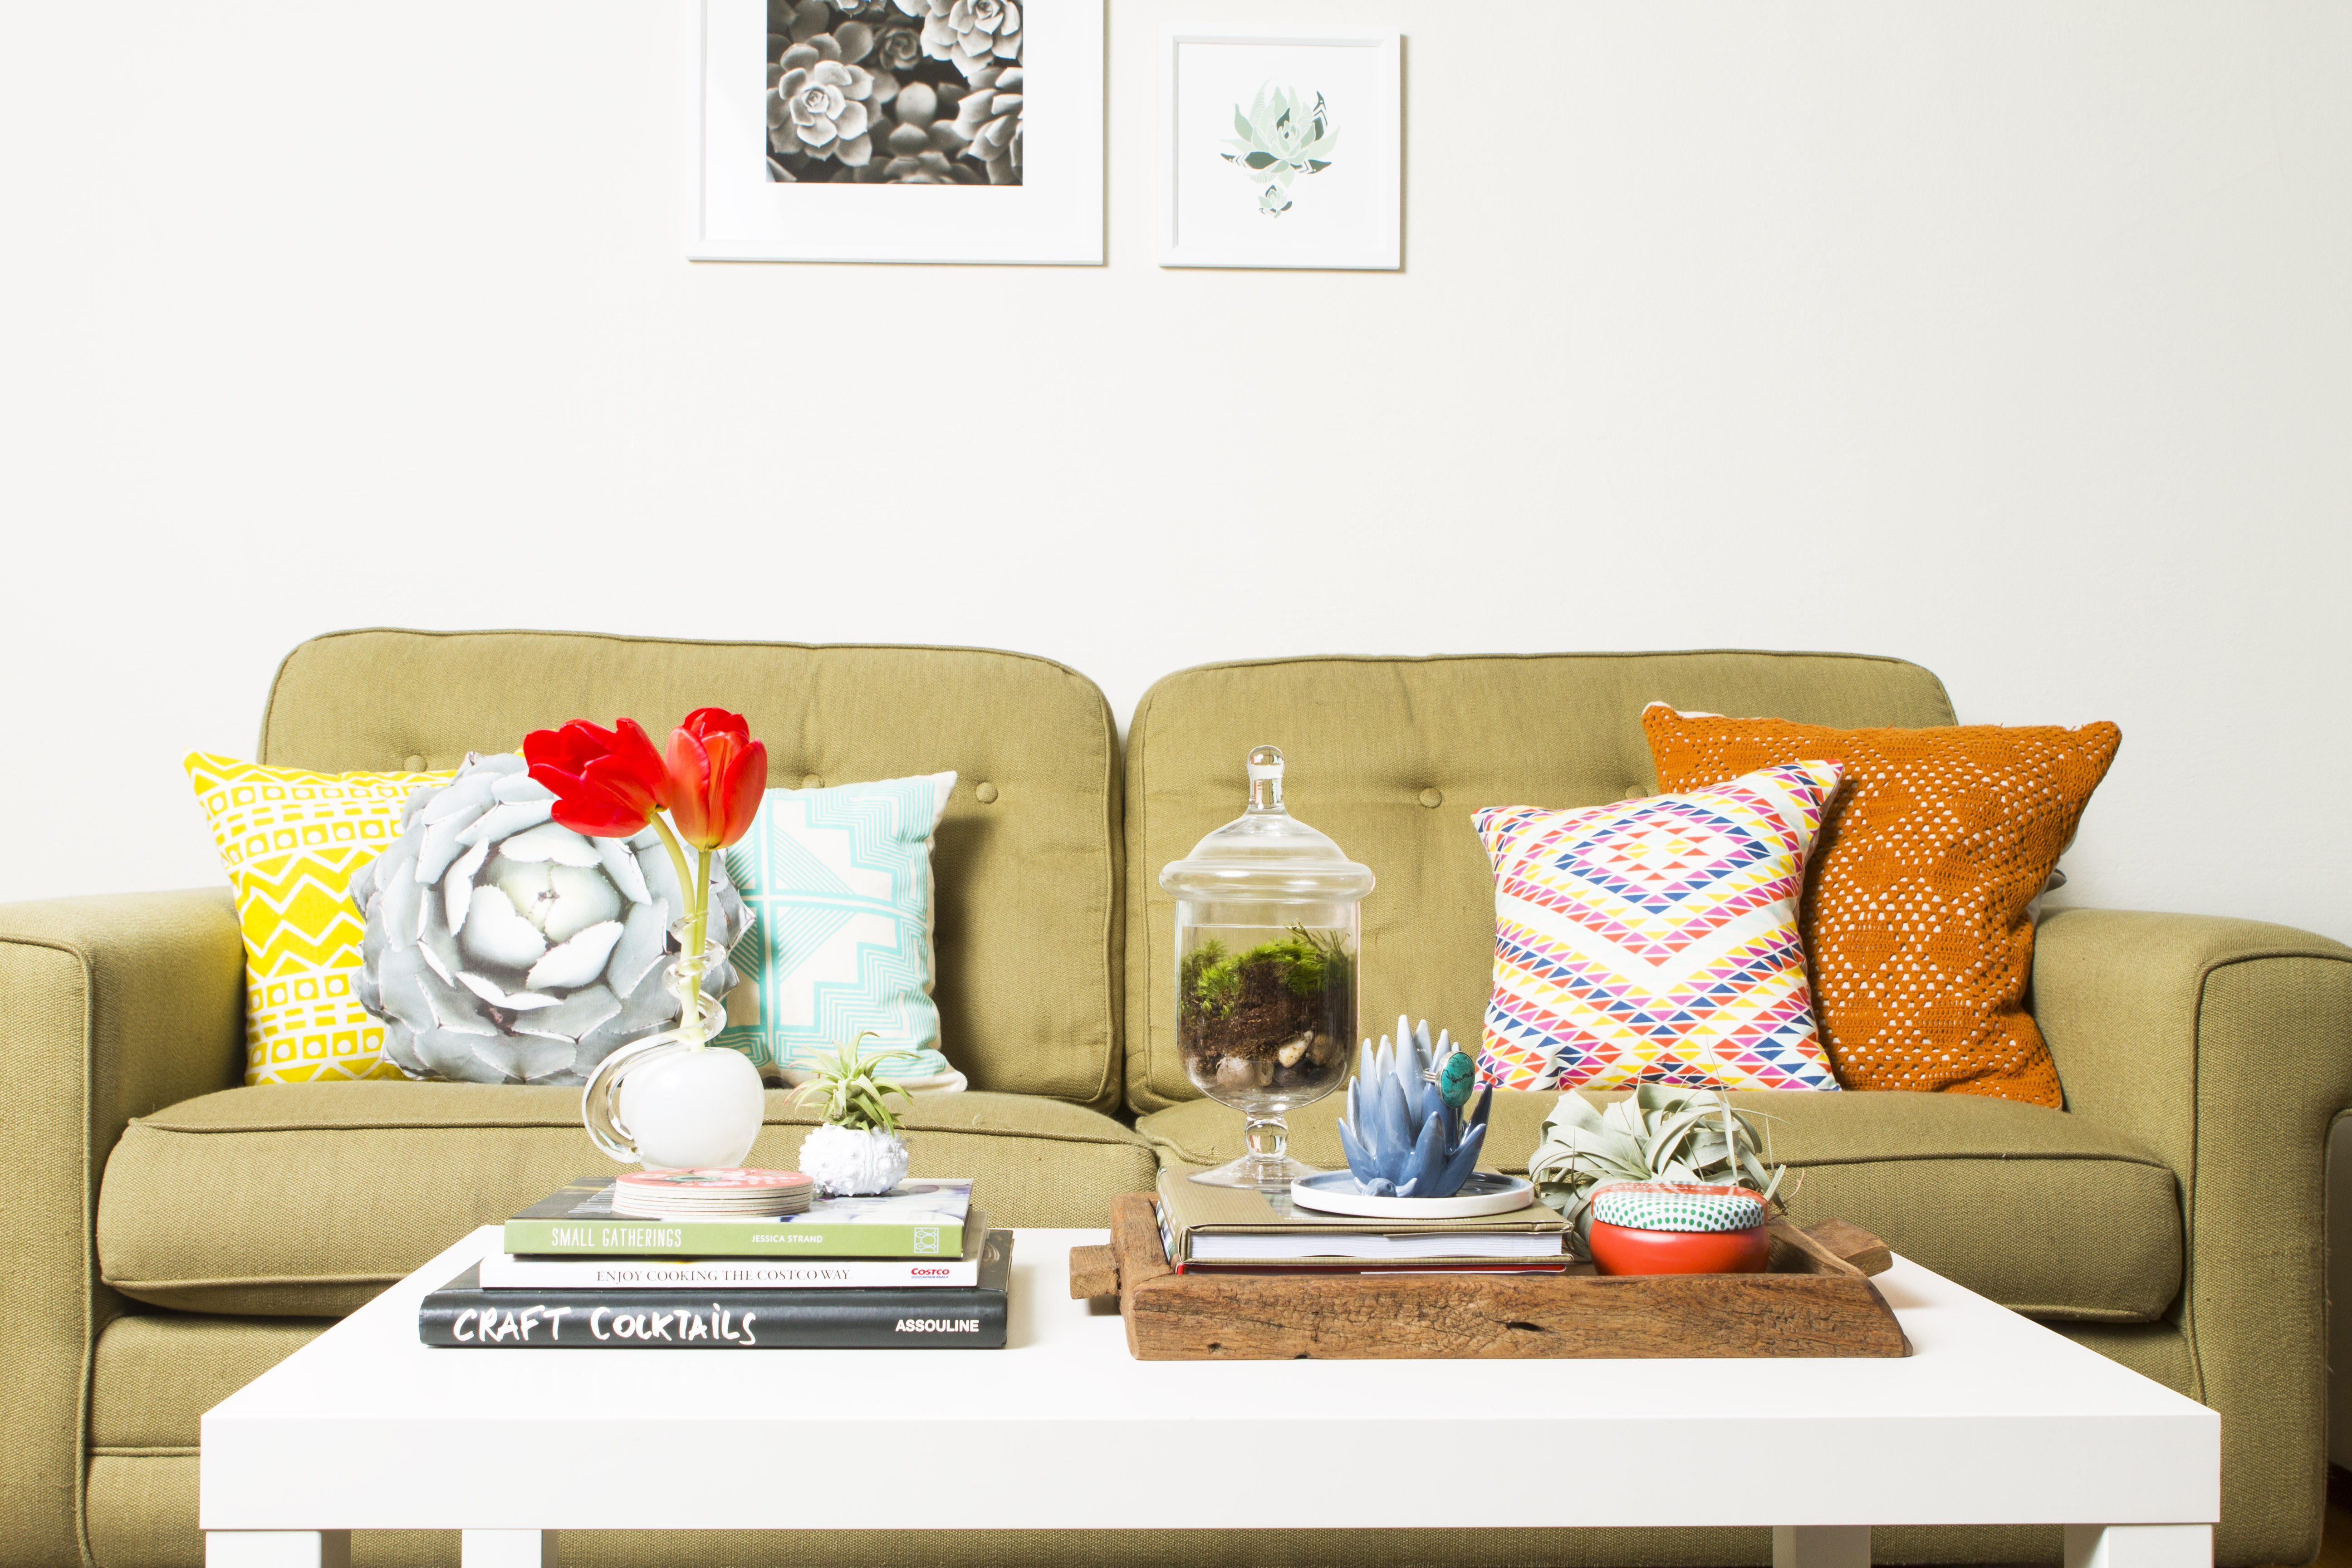 The Best Websites For Getting Designer Furniture At Bargain Prices | HuffPost